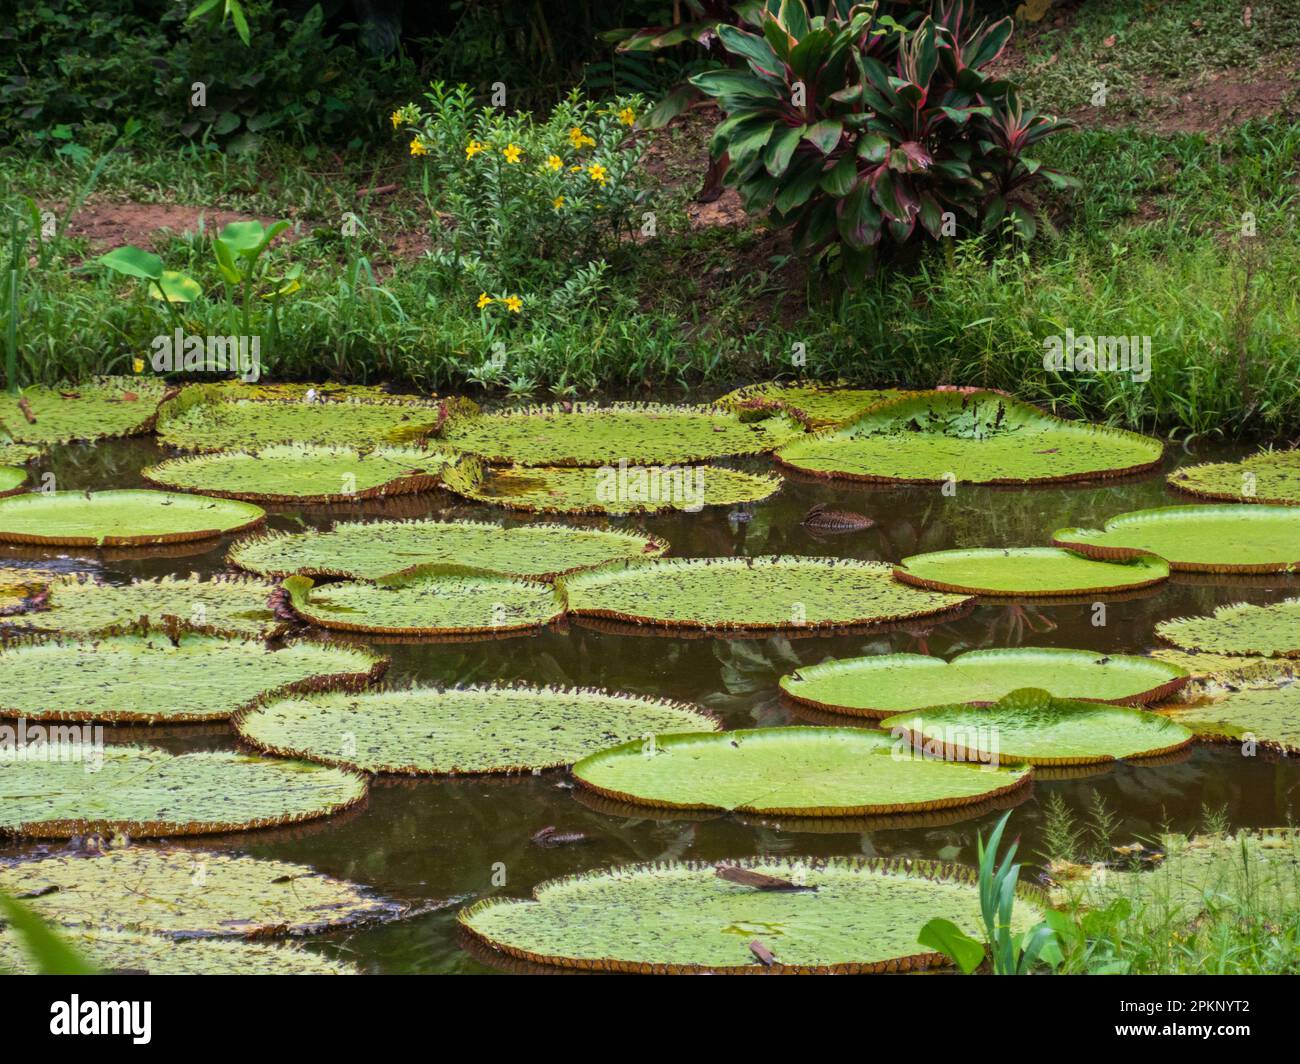 Victoria amazonica in the Natura Park In Amzonia, Colombia. It is a species of flowering plant, the largest of the Nymphaeaceae family of water lilies Stock Photo